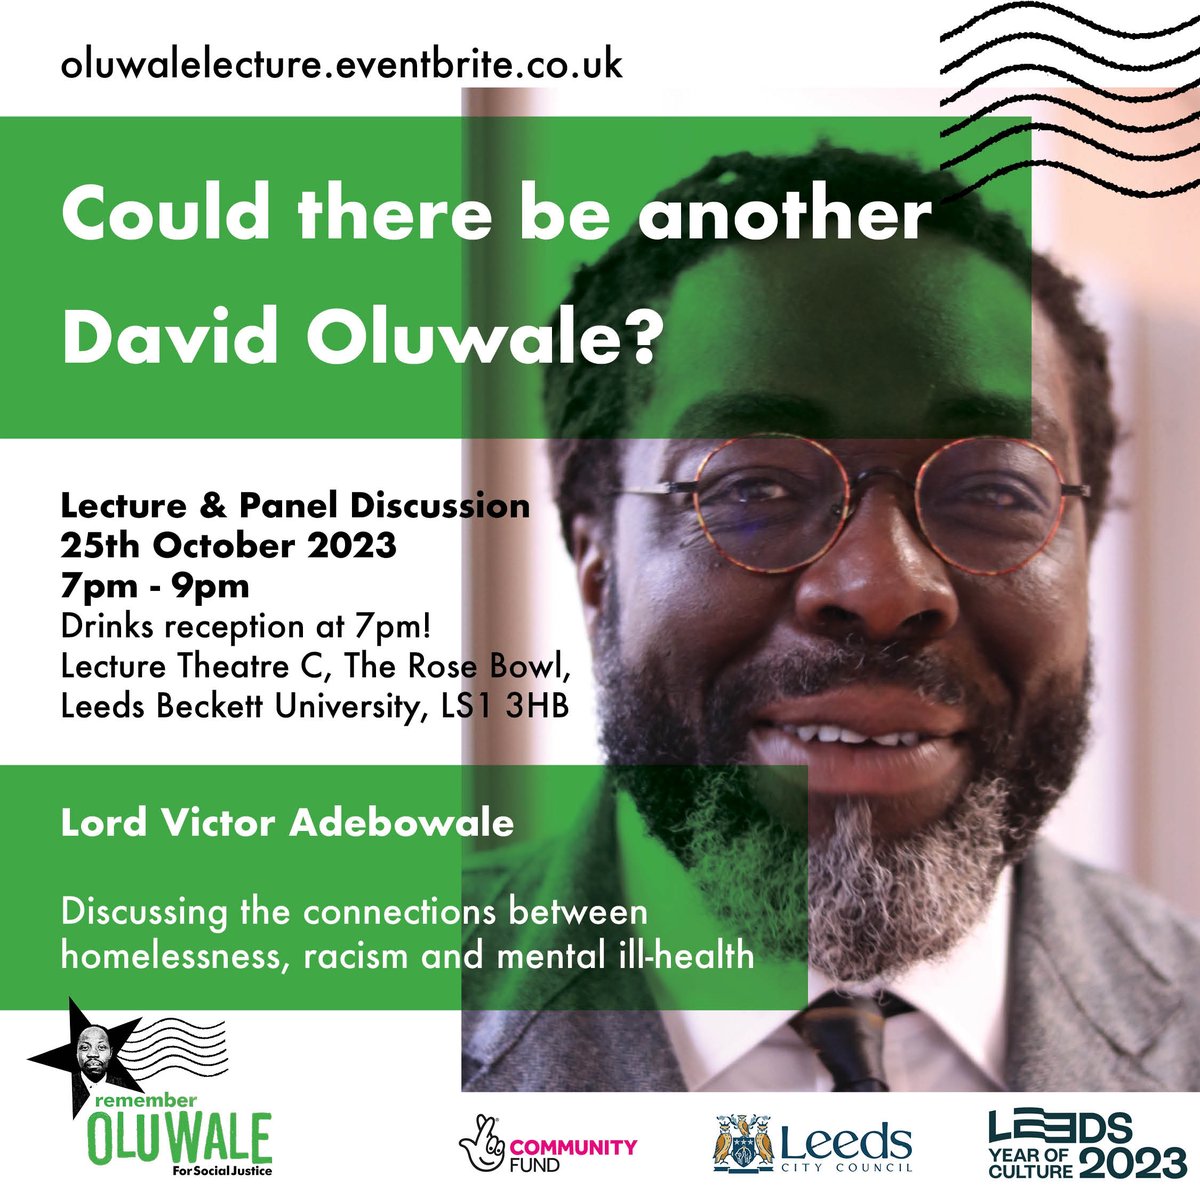 1/4 ‘Could there be another David Oluwale?’ with Lord Victor Adebowale @Voa1234 Lord Victor Adebowale Lecture & panel discussion: 7-9, Weds 25th Oct 2023, Rosebowl, LS1 Booking essential: oluwalelecture.eventbrite.co.uk #rememberoluwale